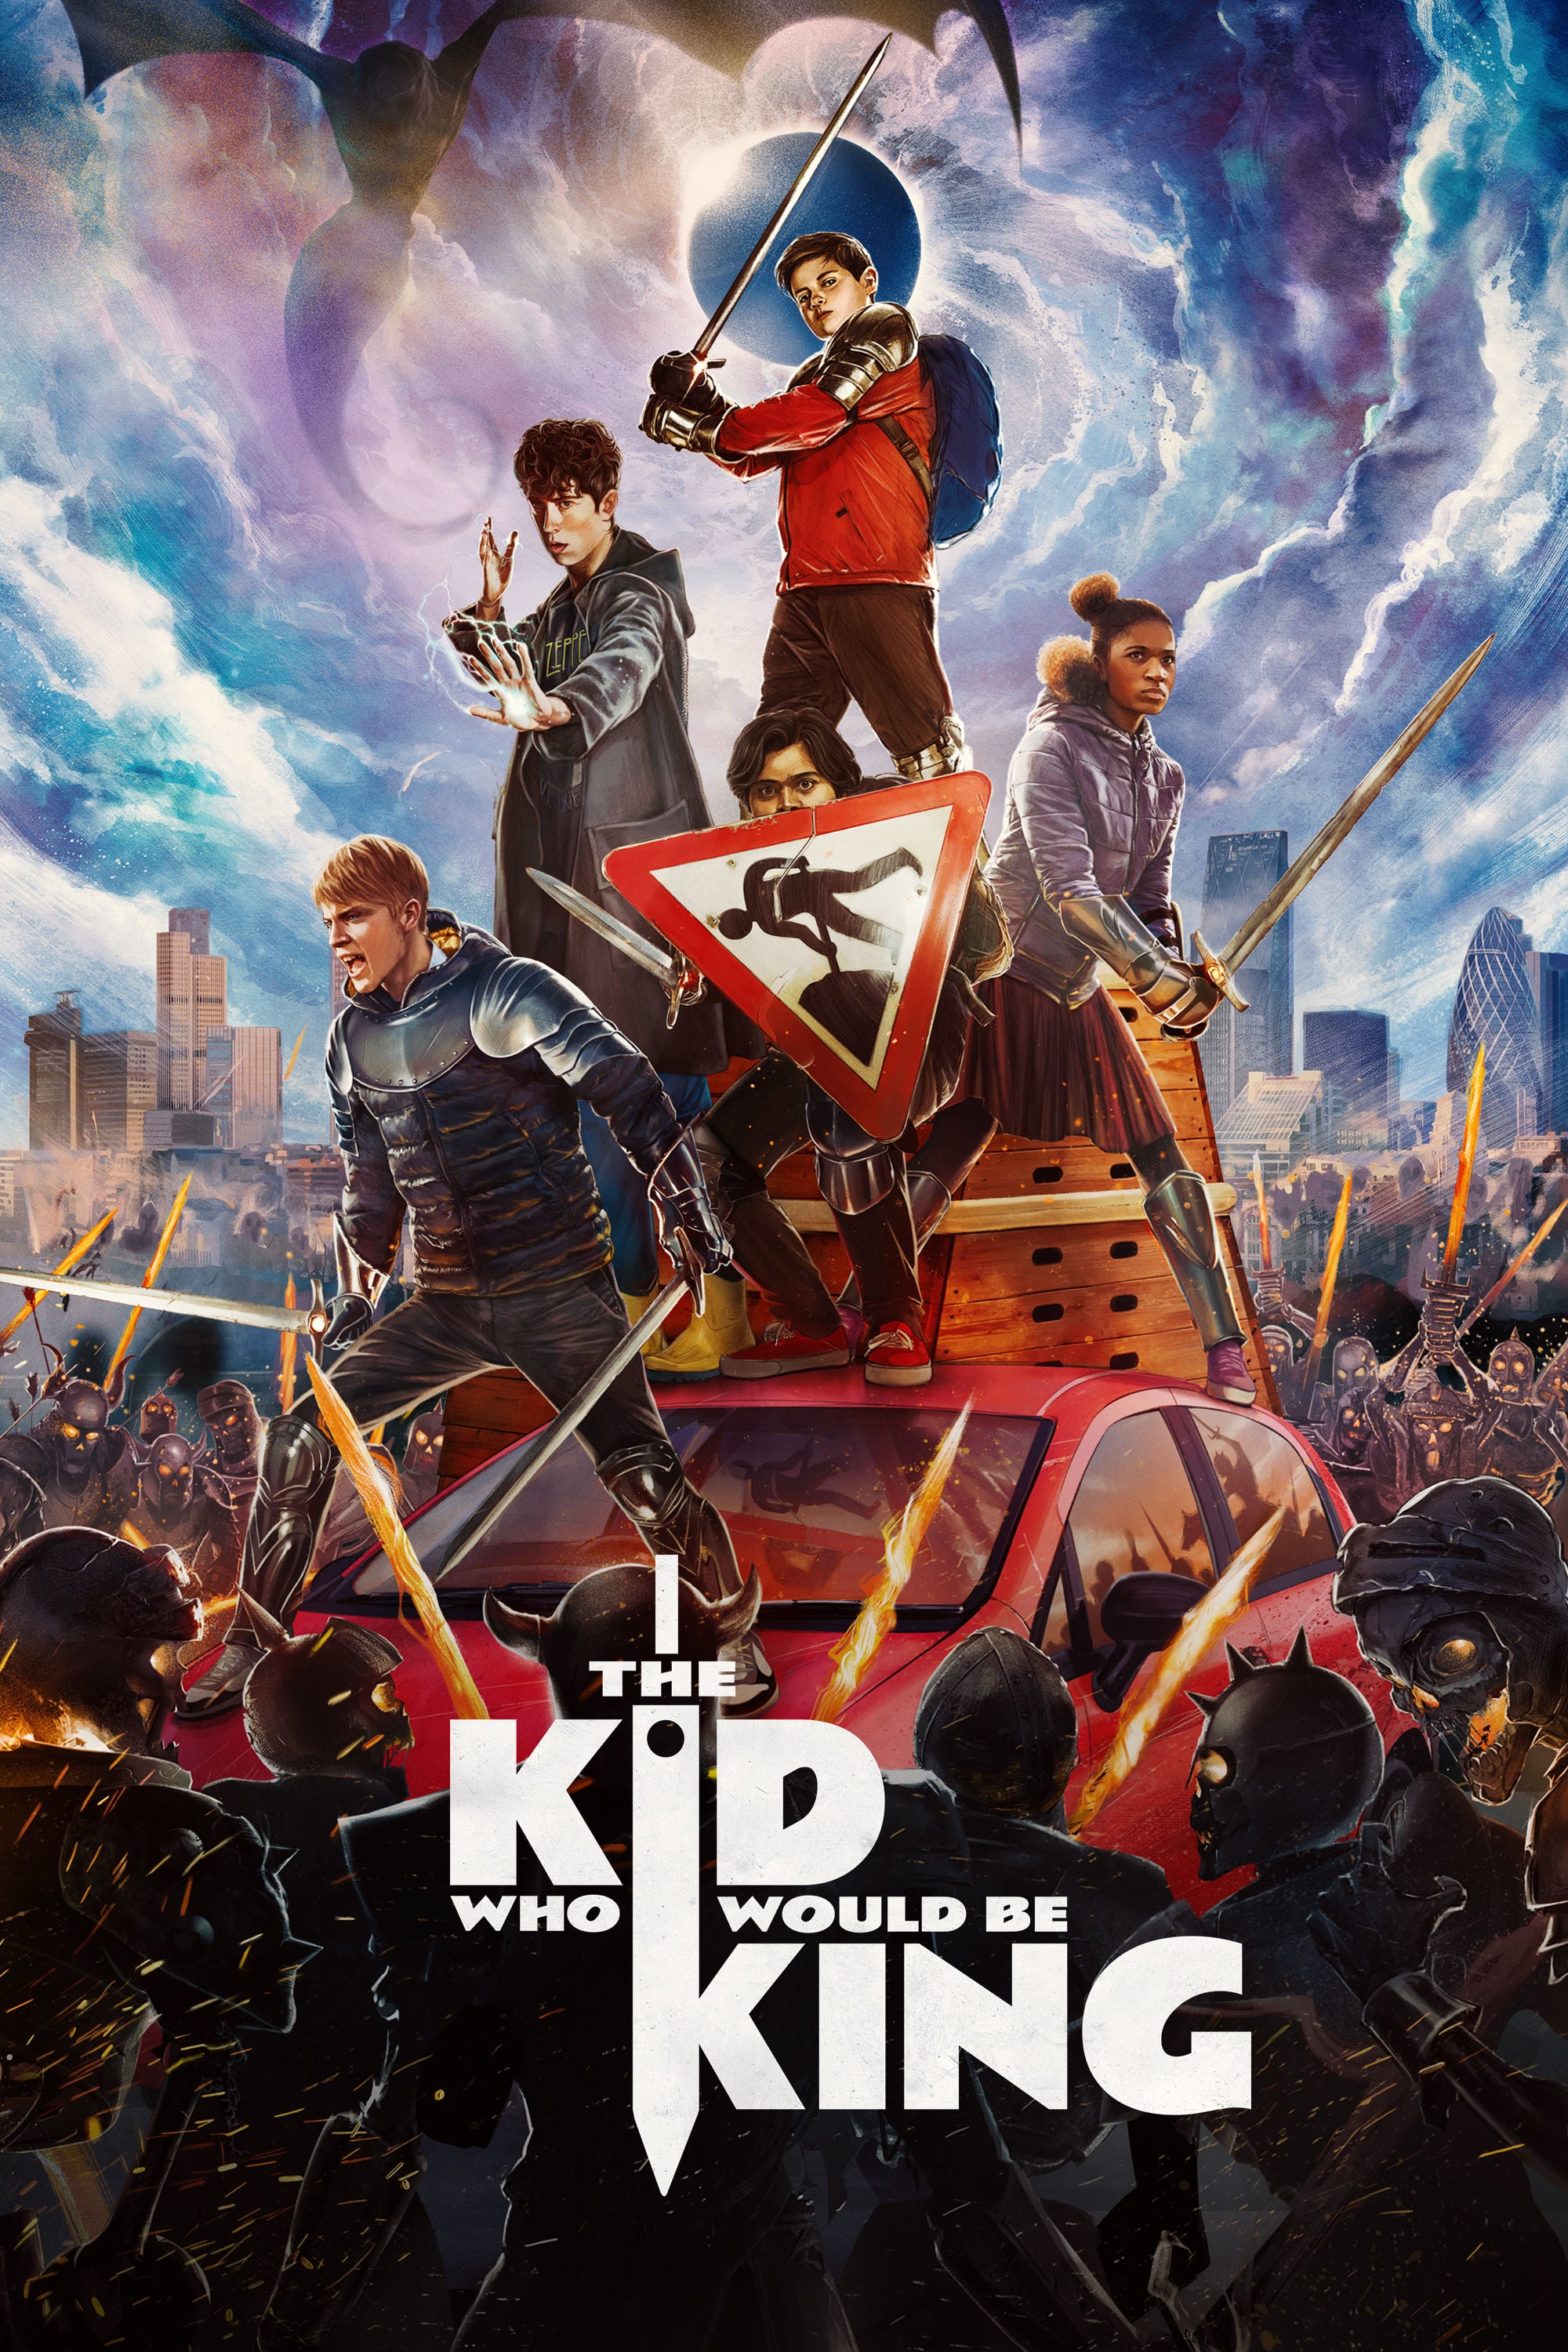 Poster for the movie "The Kid Who Would Be King"